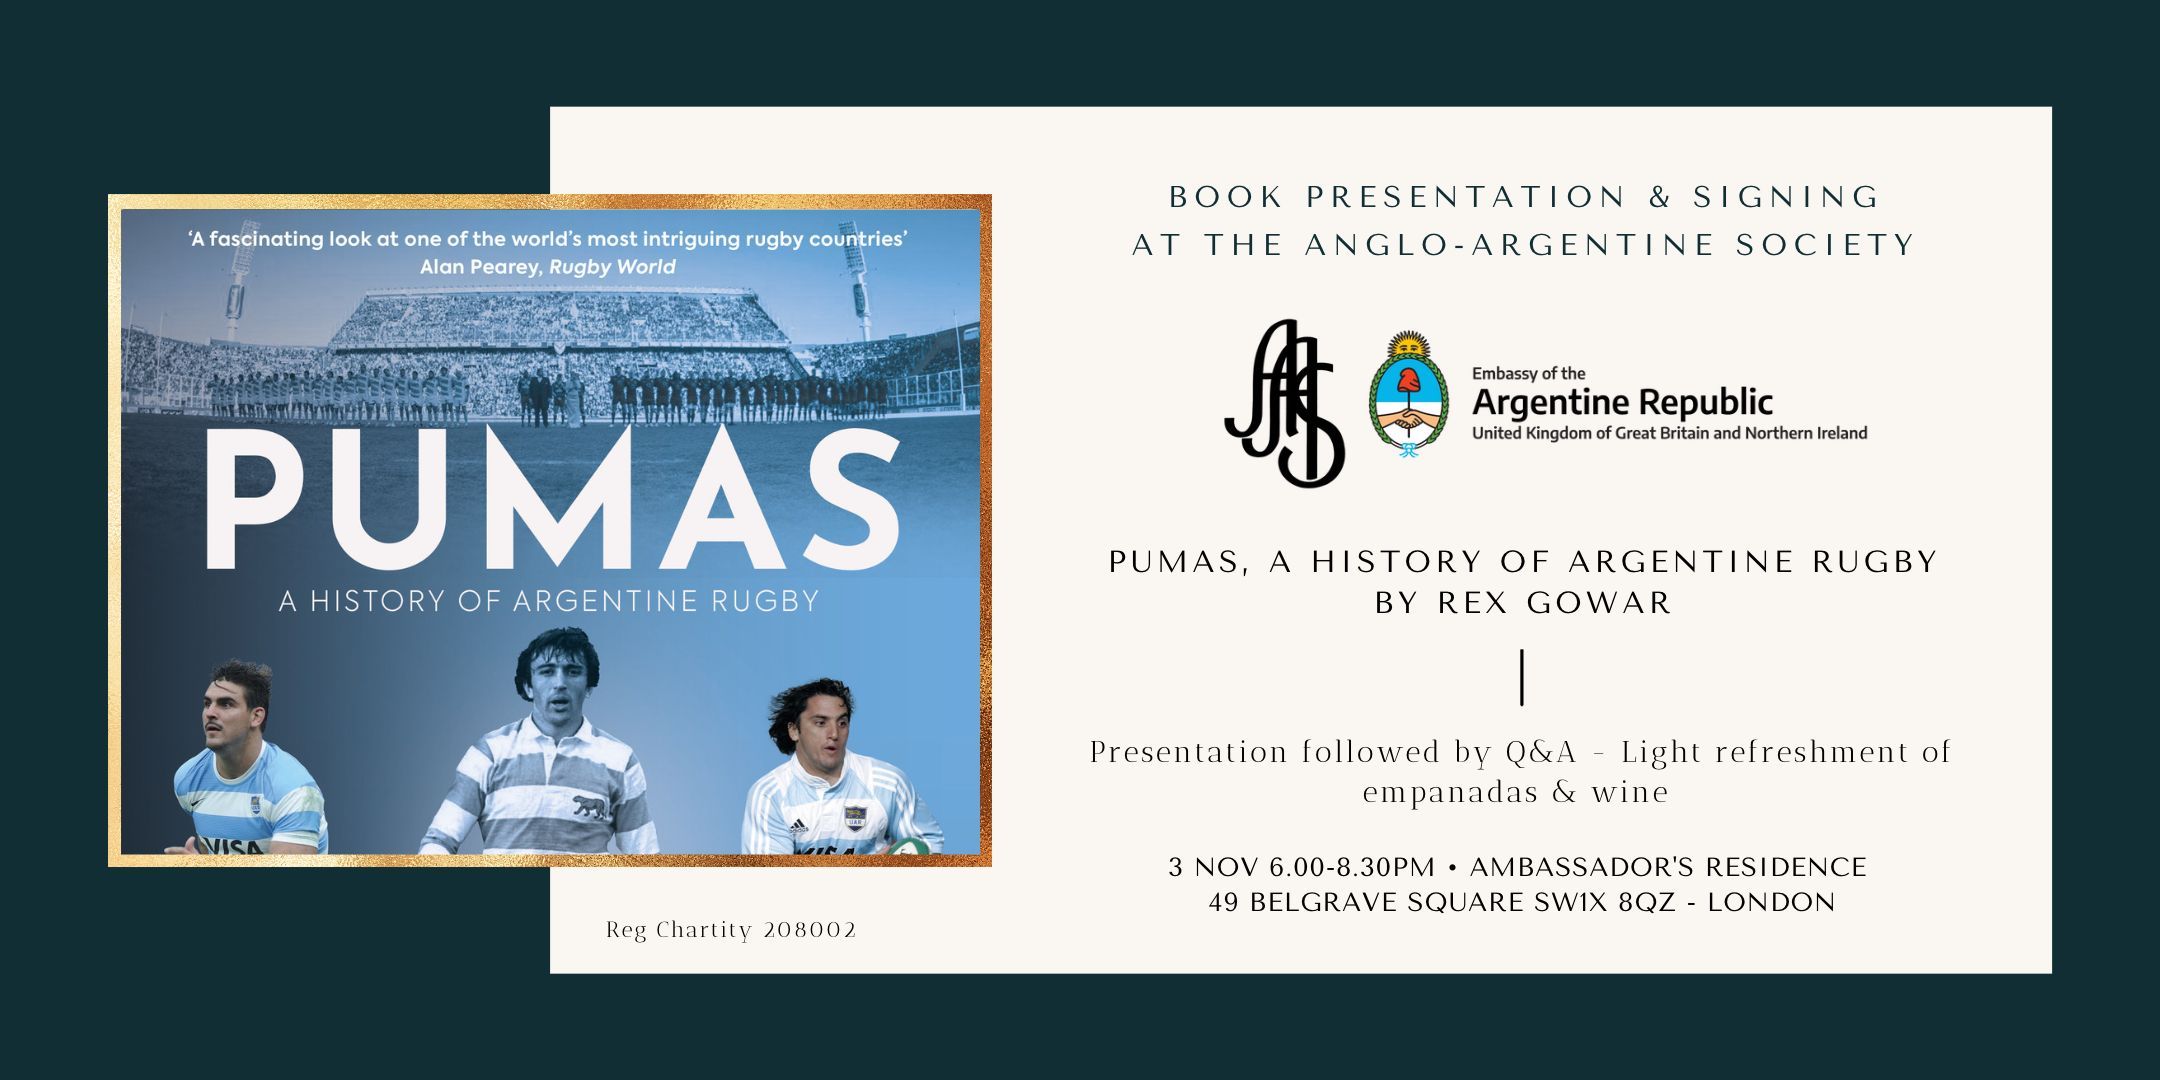 Pumas, A History of Argentine Rugby